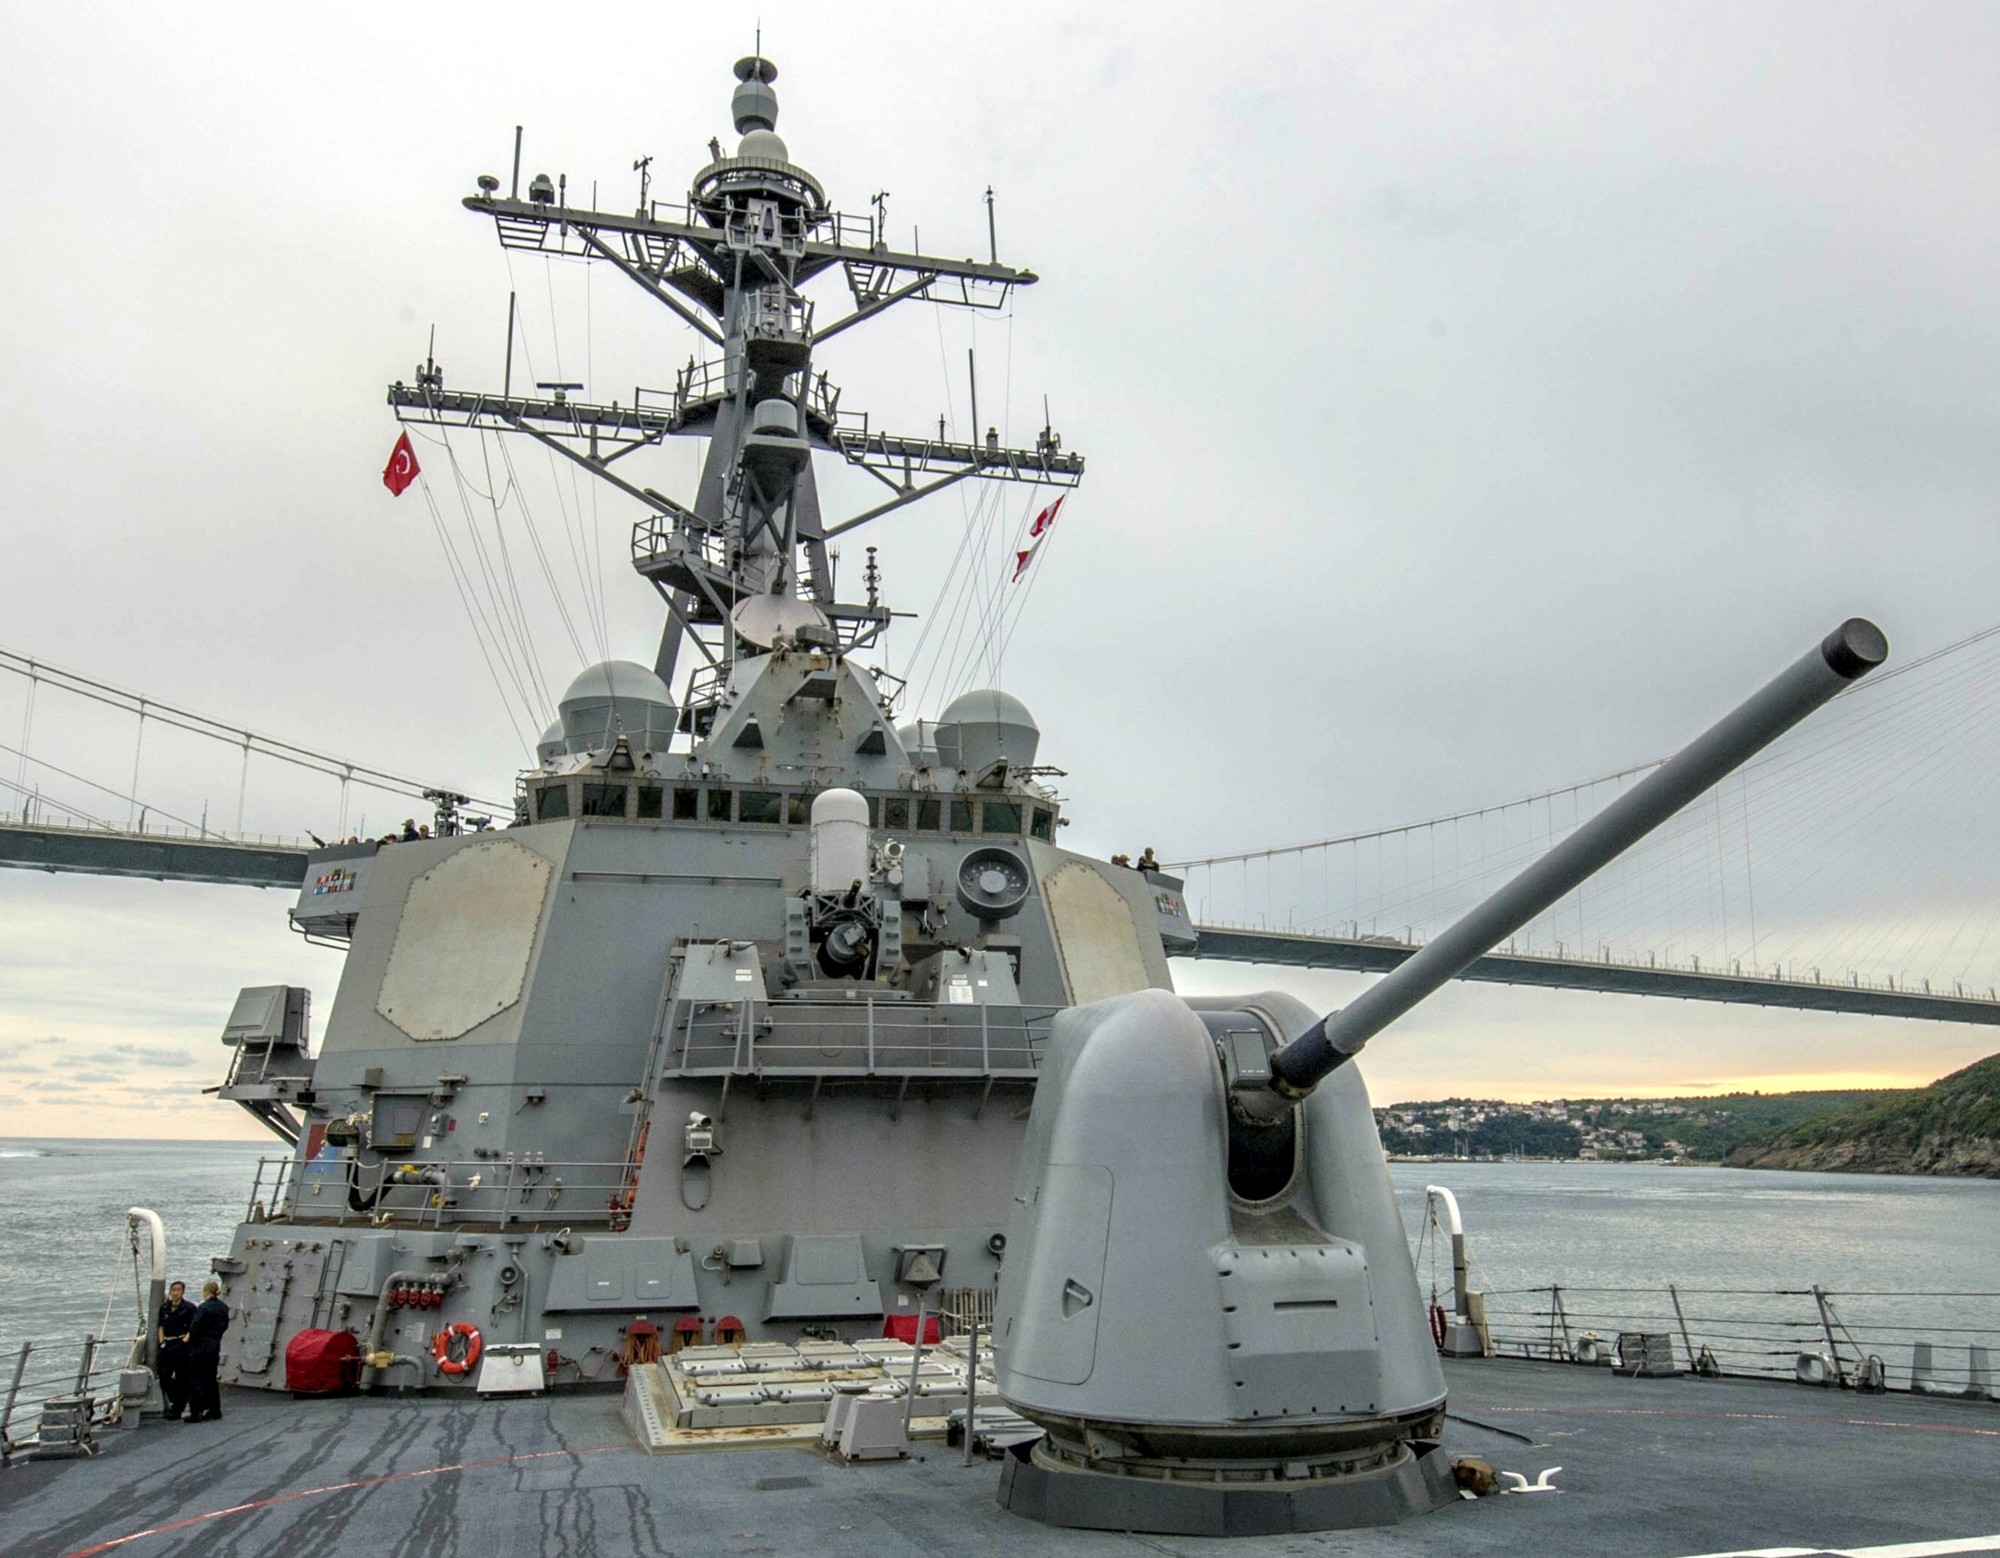 ddg-64 uss carney guided missile destroyer arleigh burke class 104